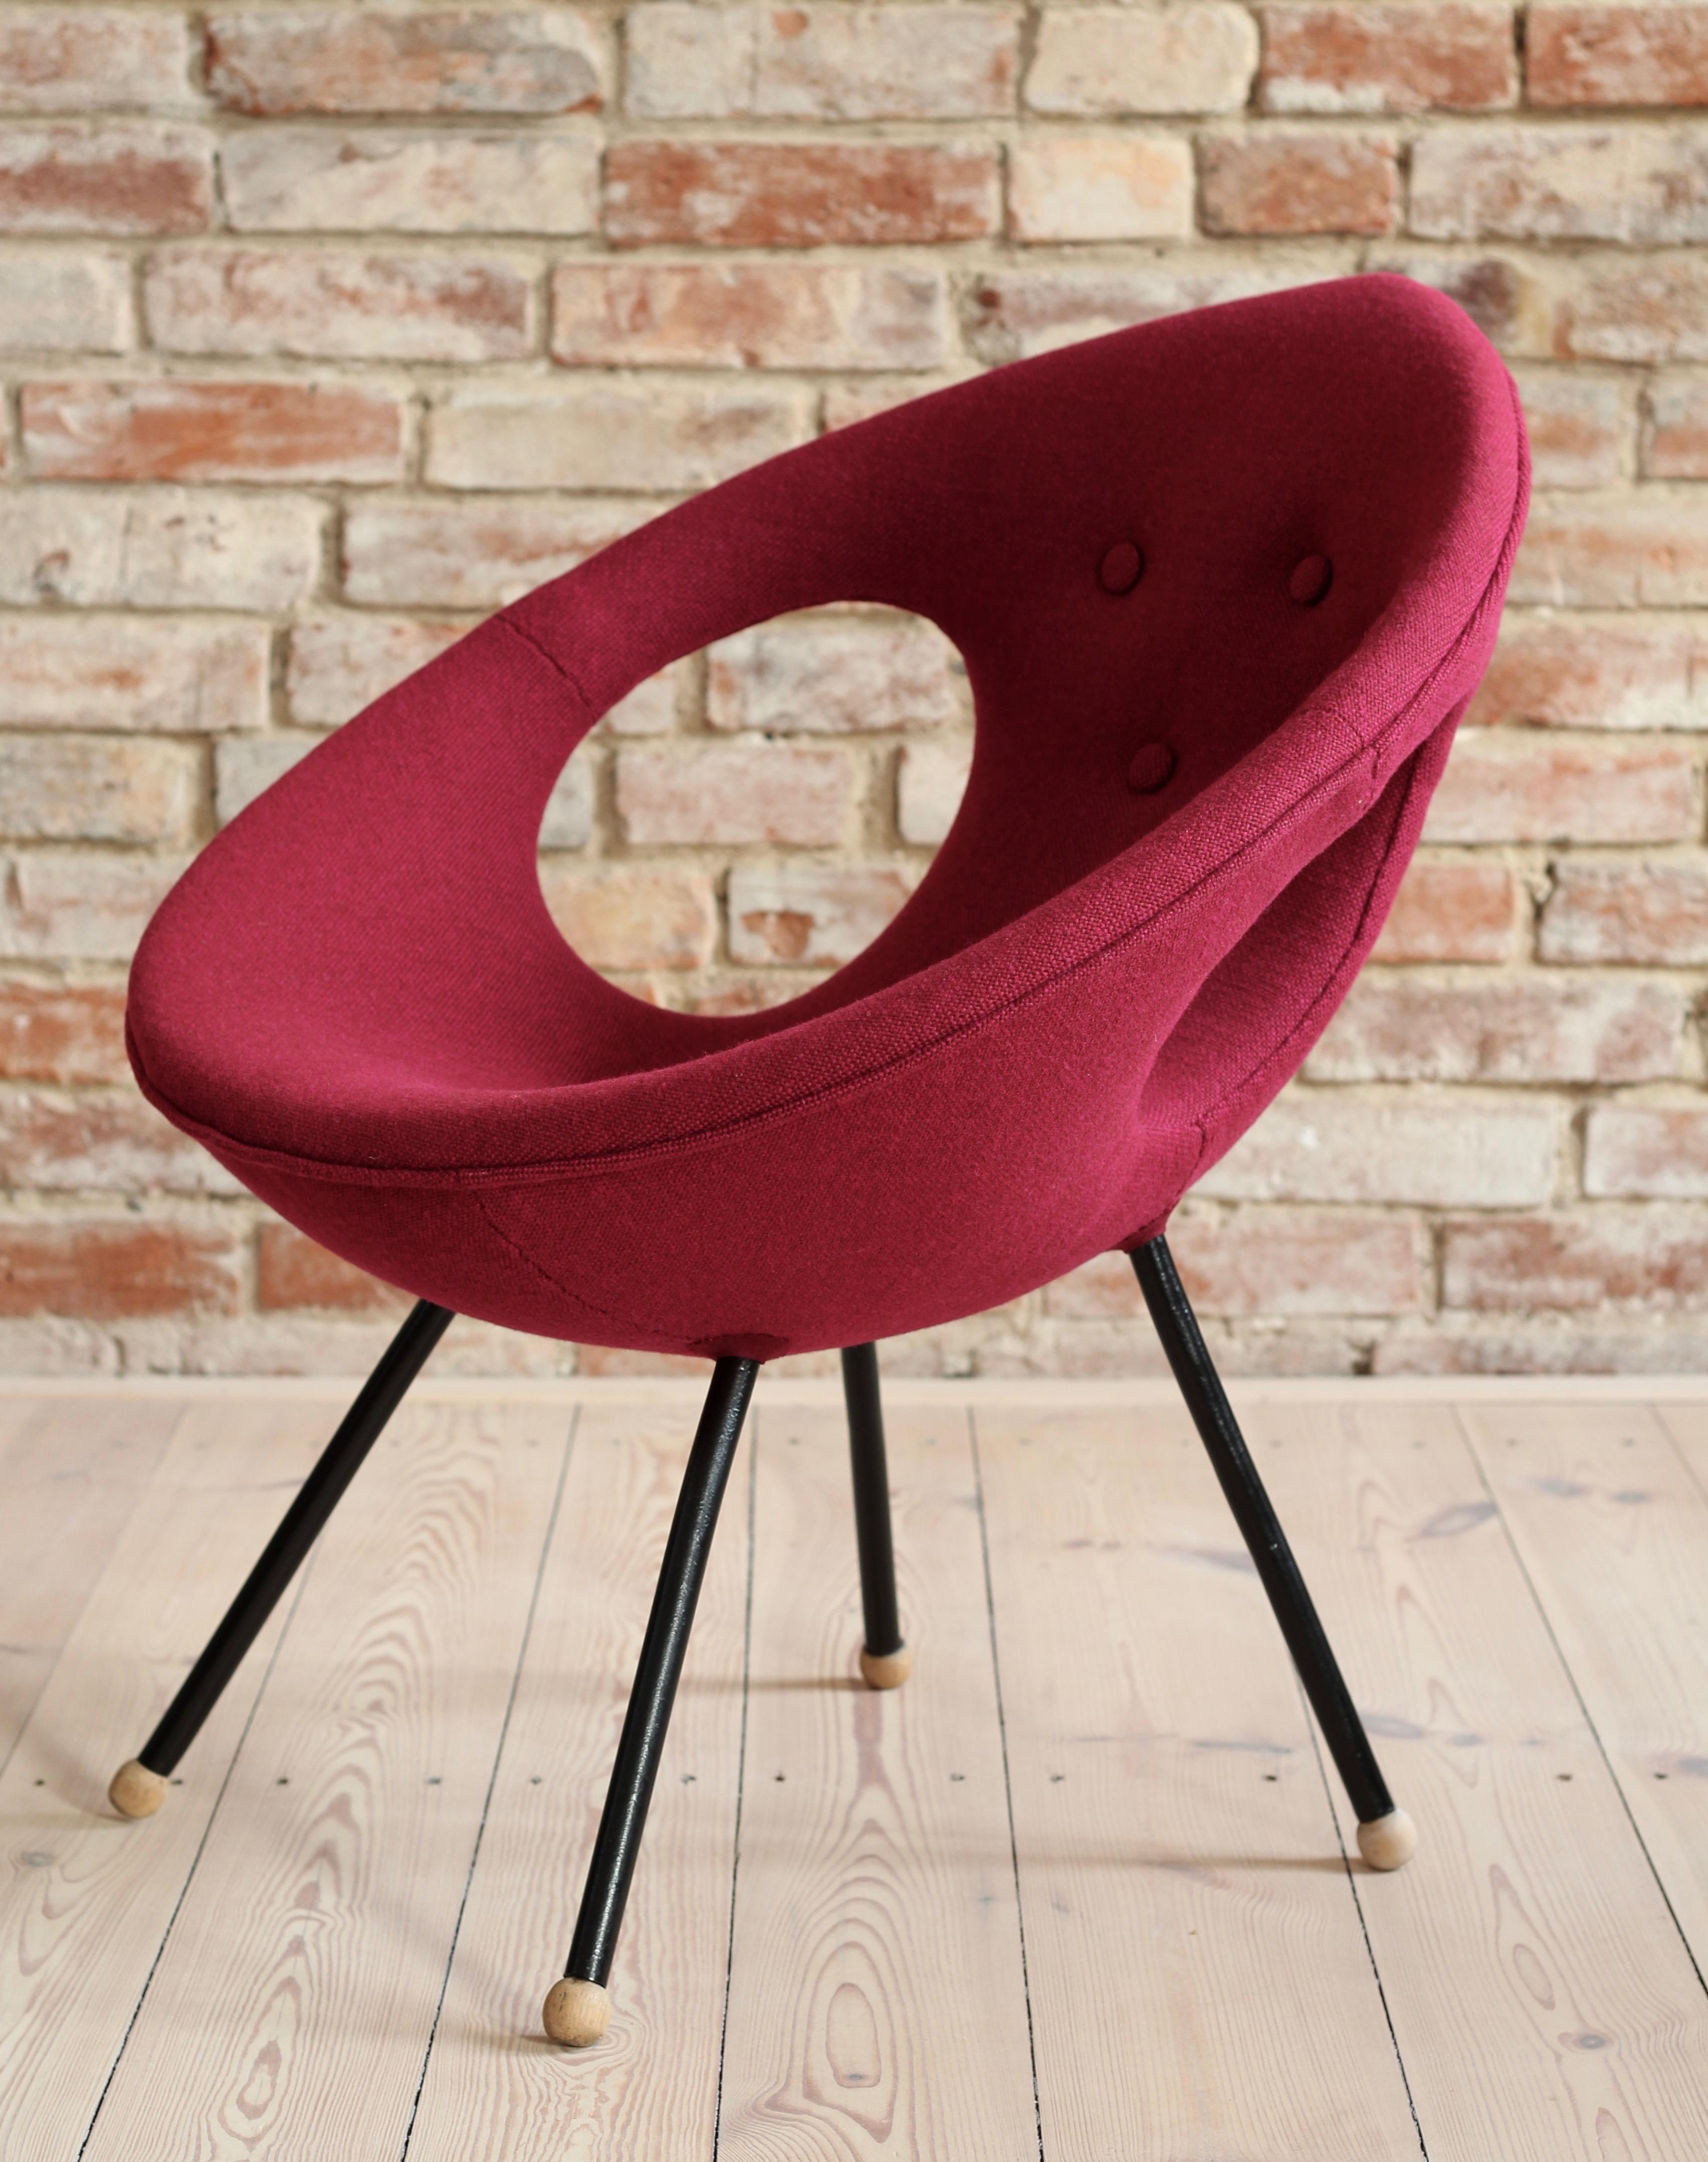 Polish Lounge Chair, UFO, Reupholstered in Kvadrat Fabric, Space Age, Midcentury